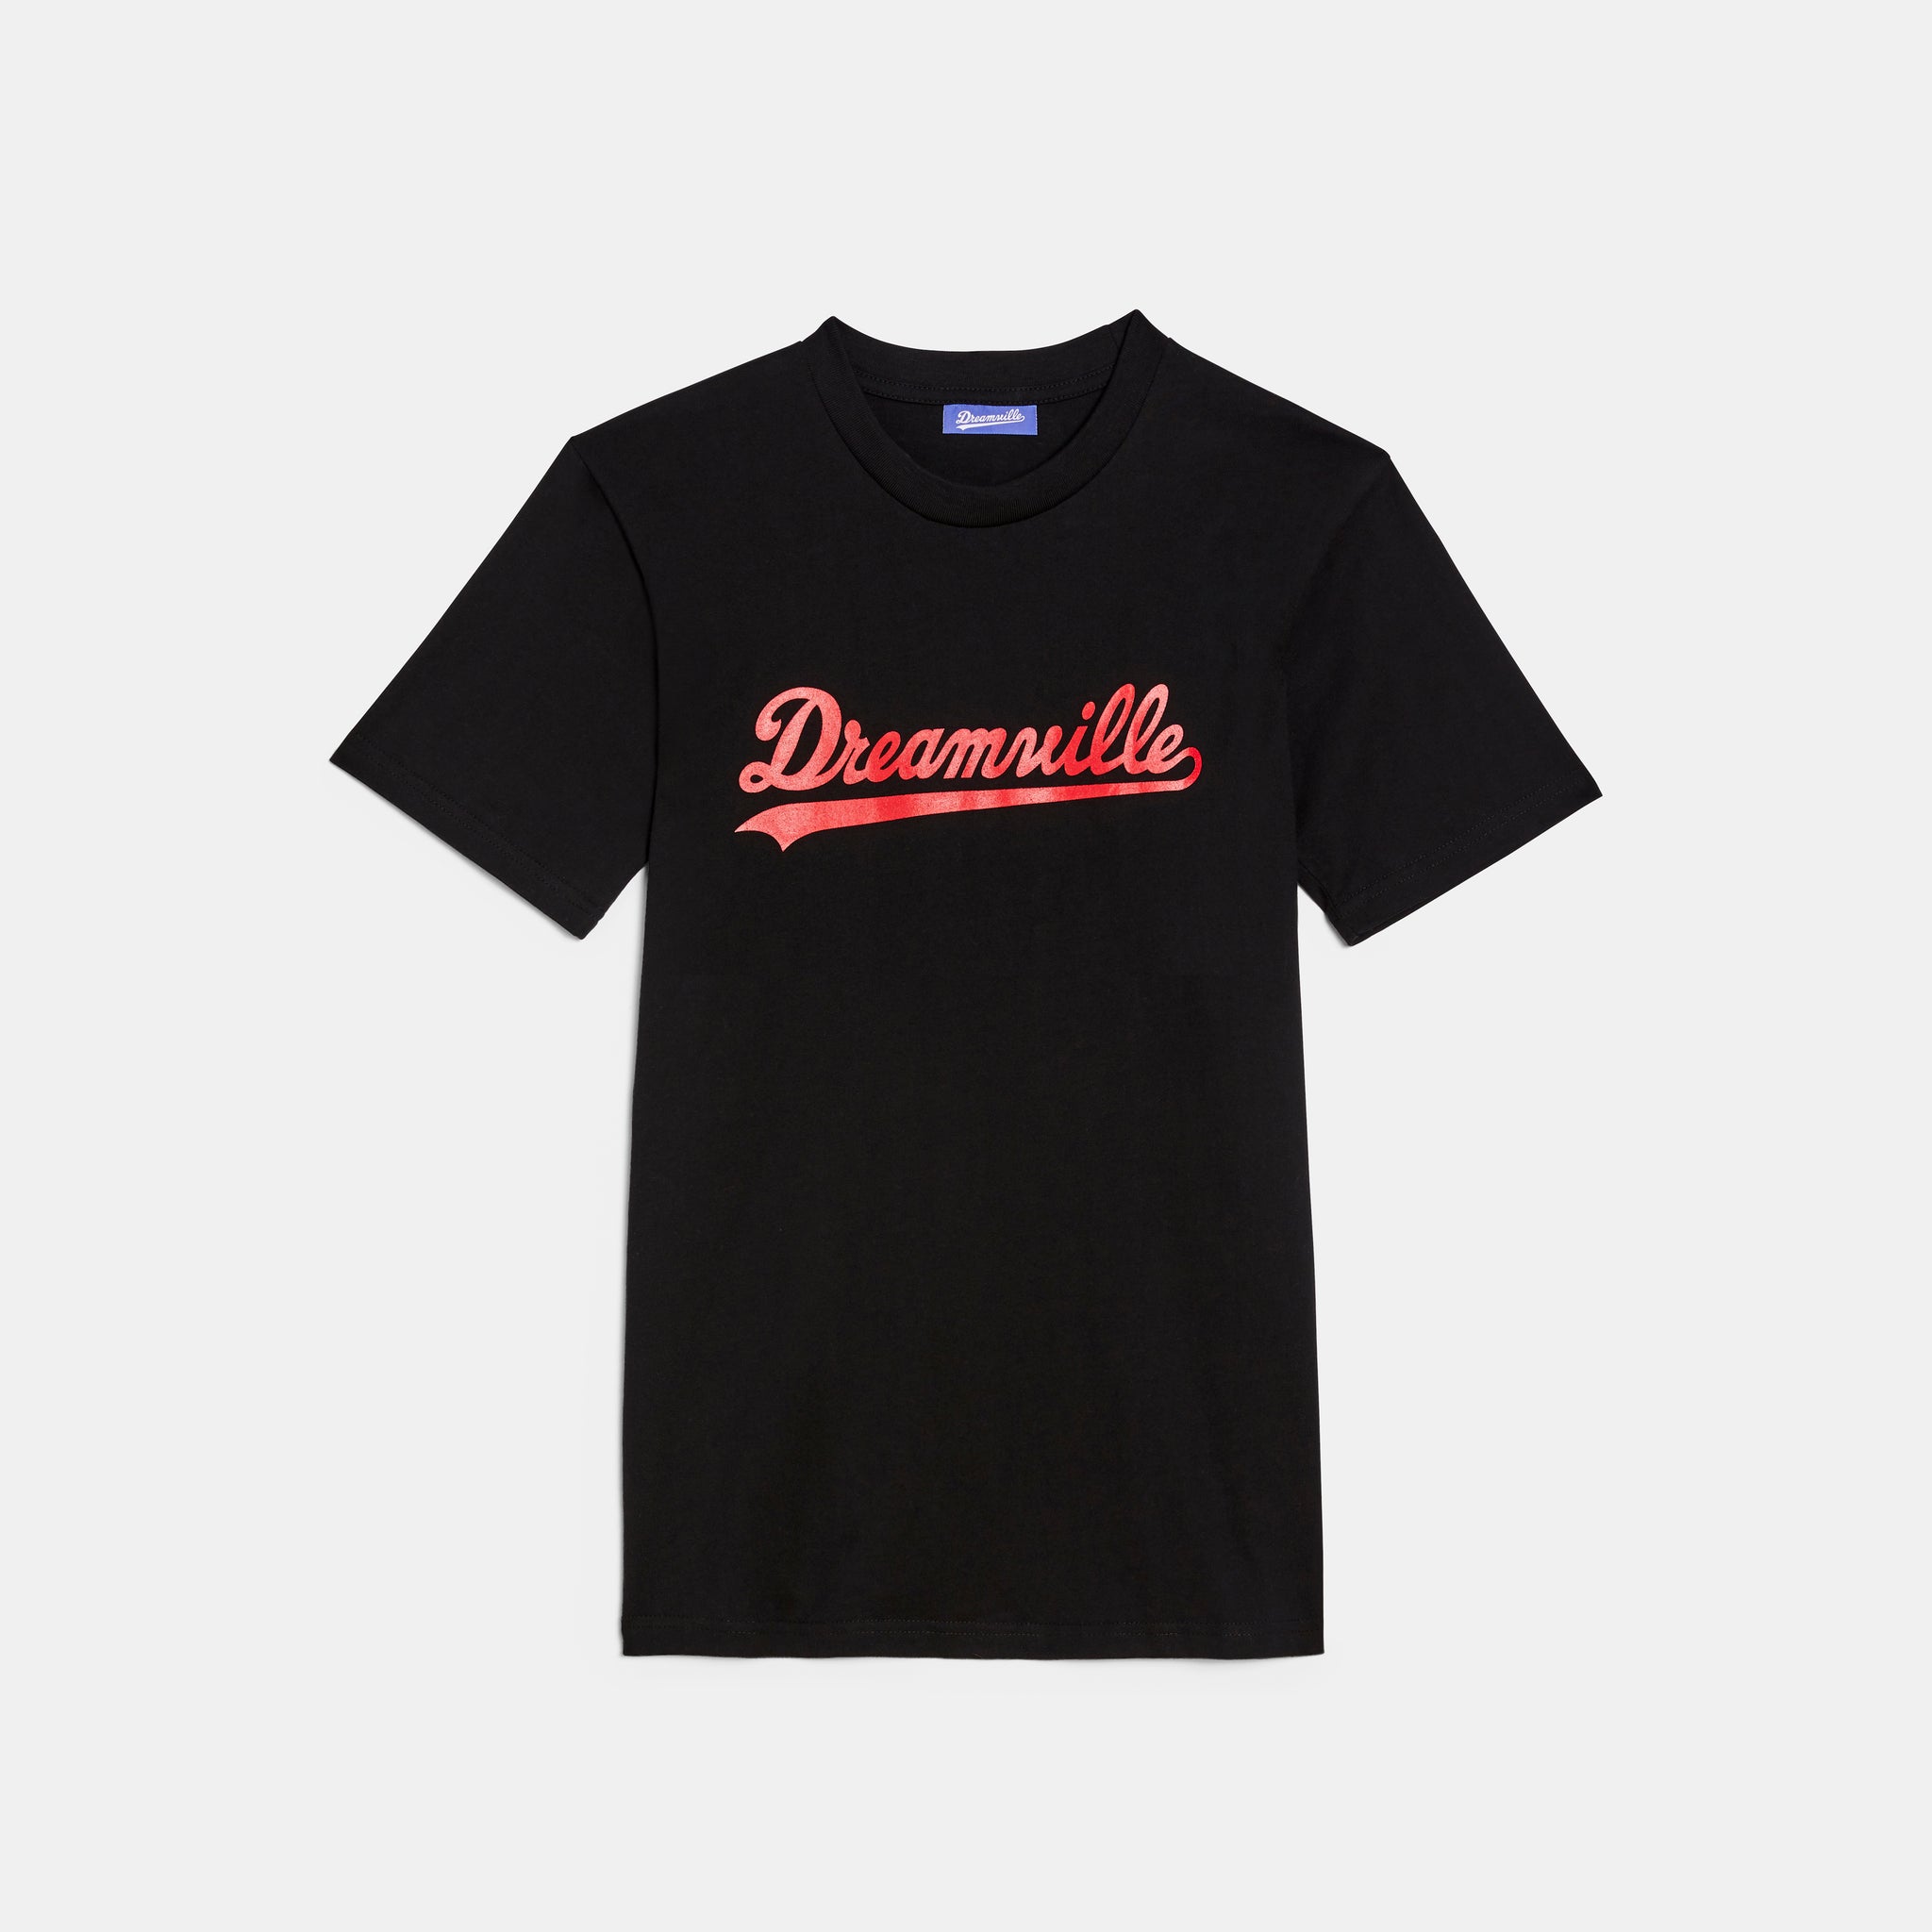 Dreamville Classic Short Sleeve Tee Black/Red Dreamville Official Store